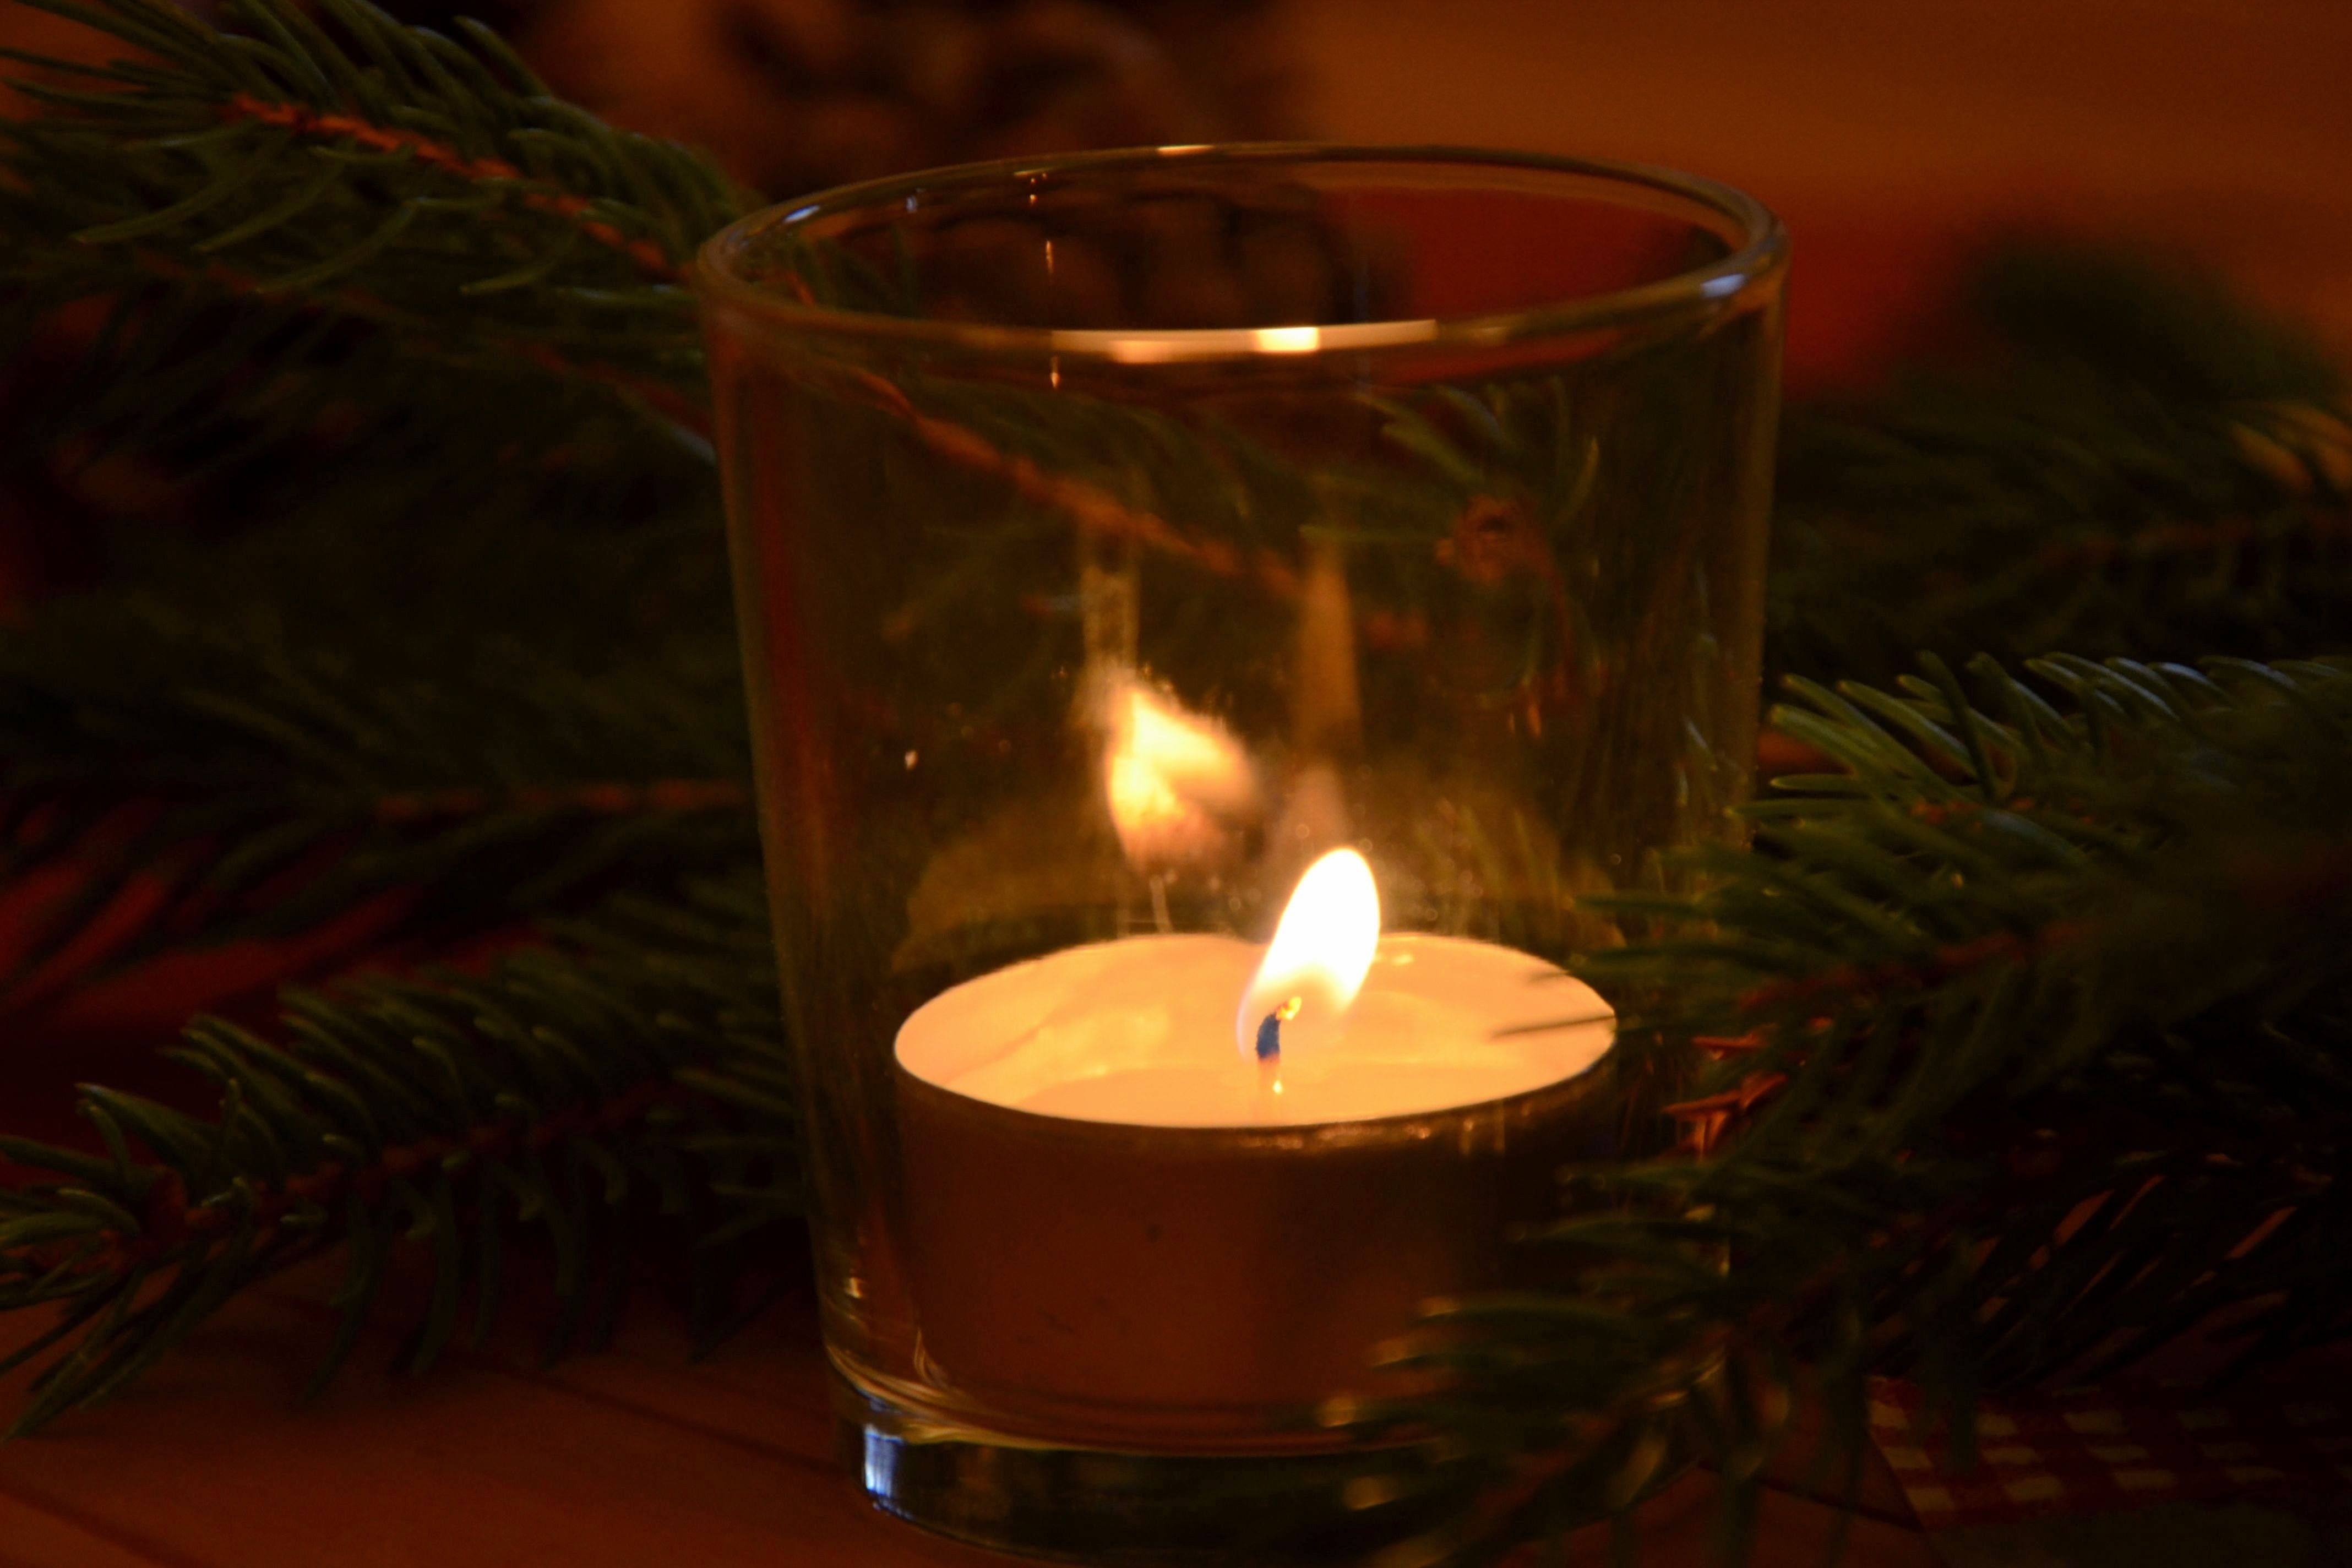 clear glass votive candle holder